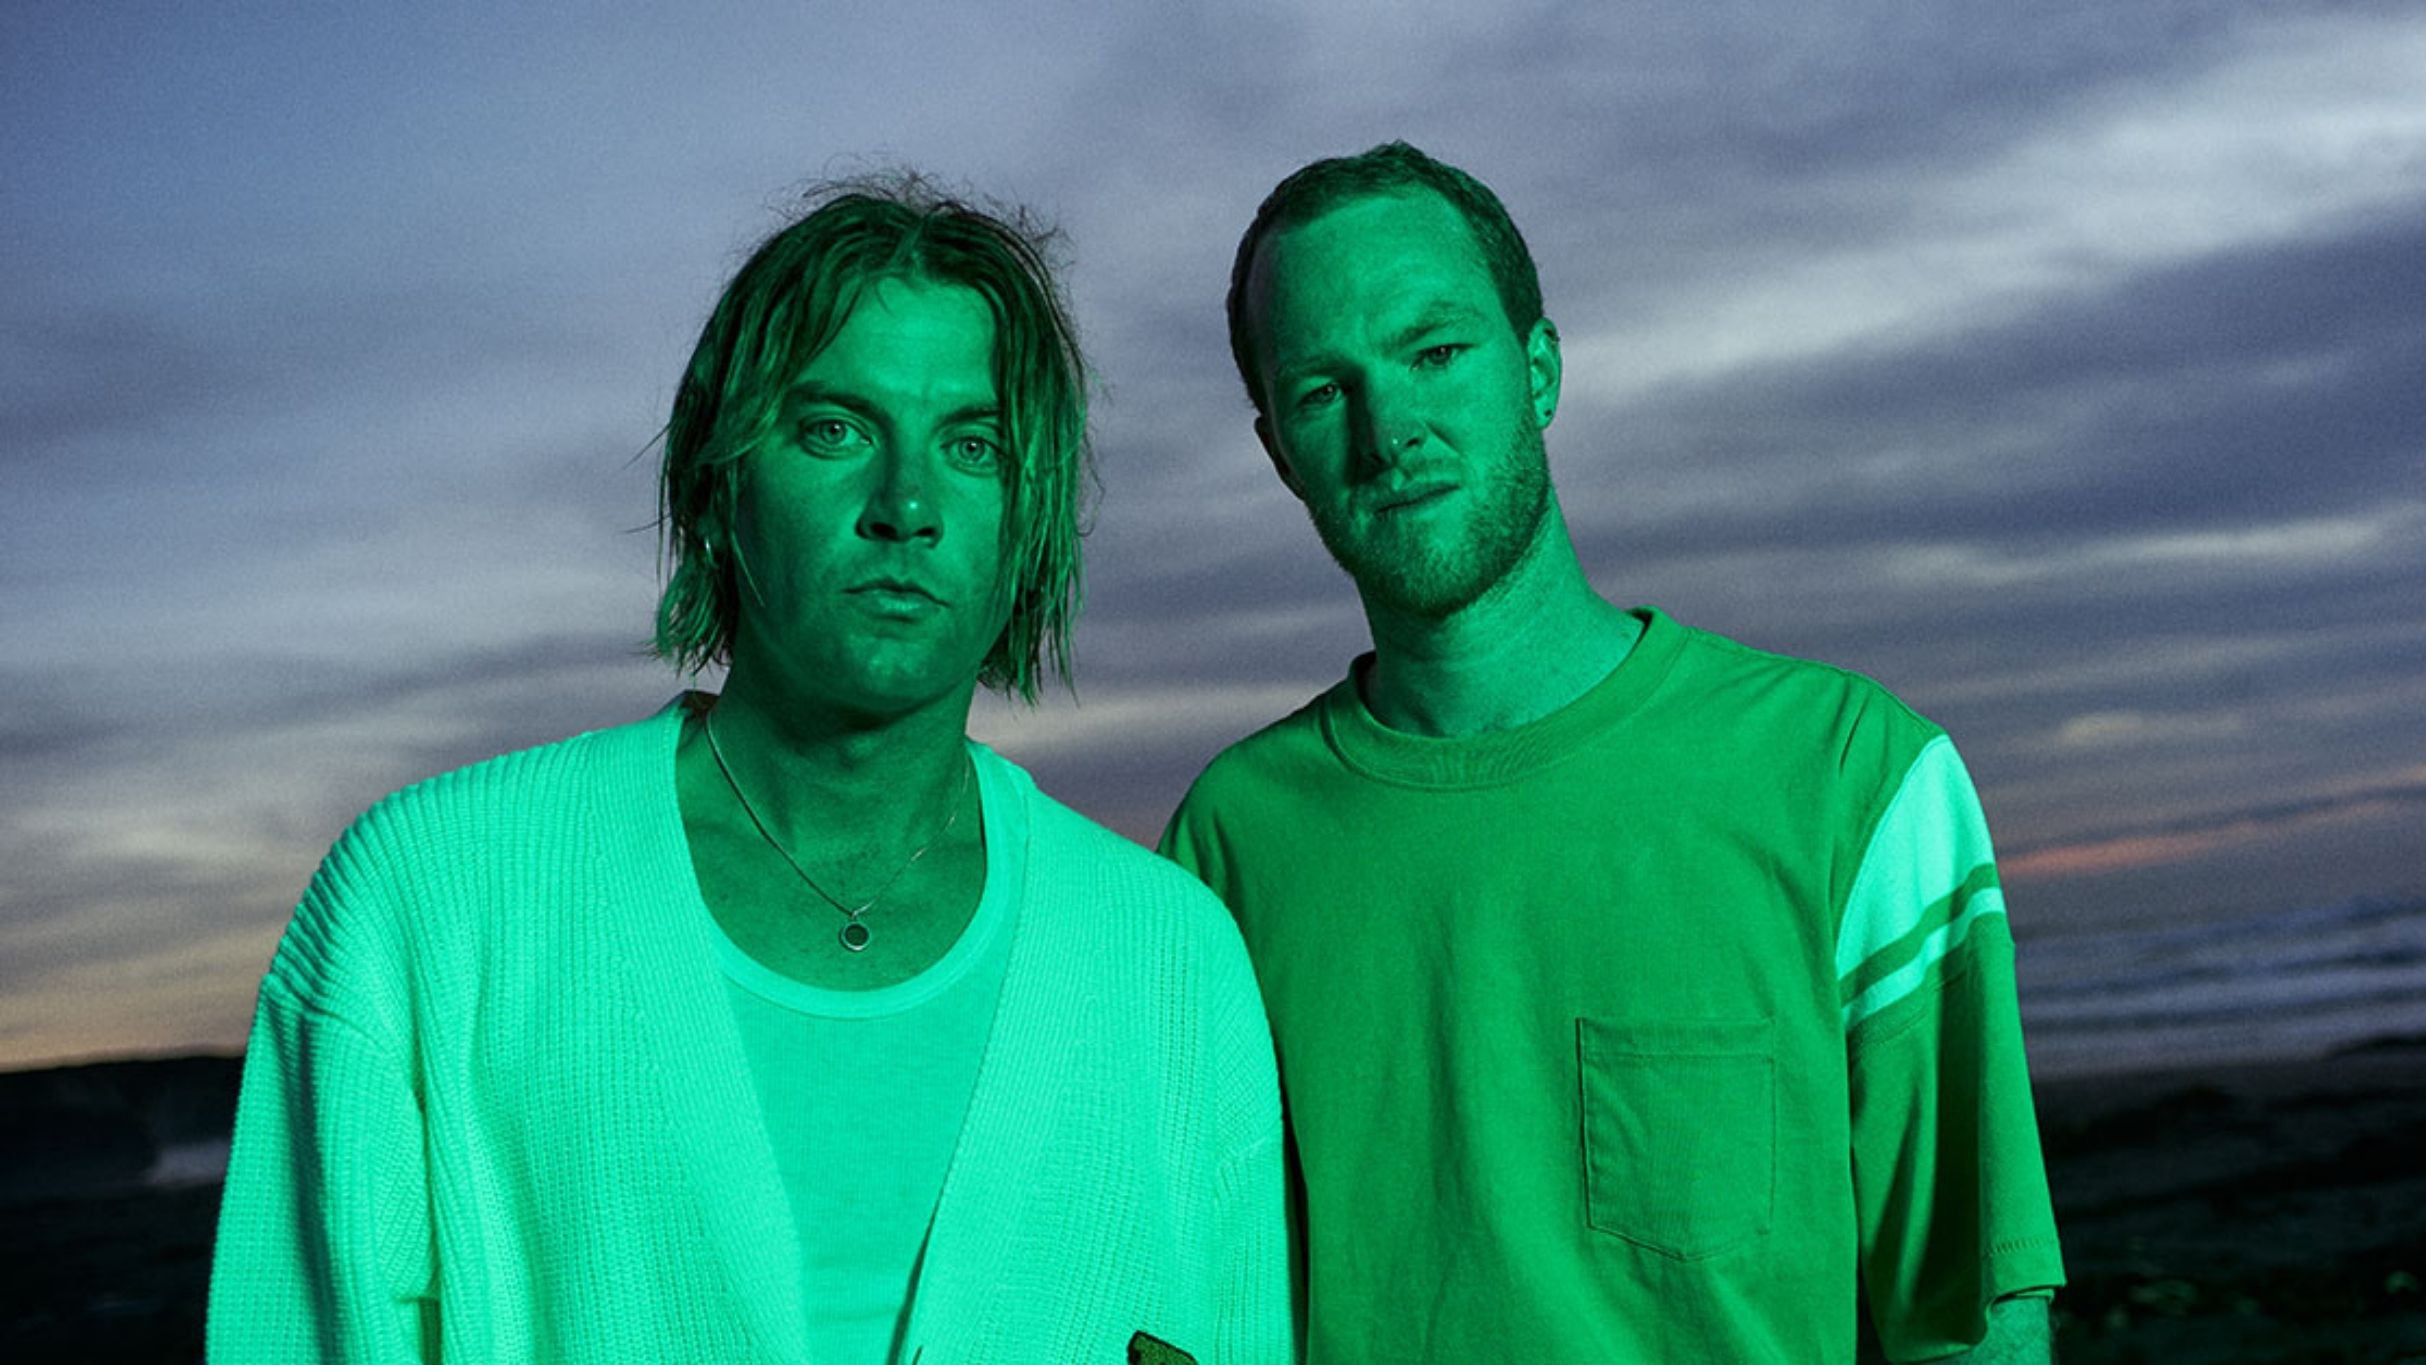 Judah & the Lion - The Process Tour presale code for legit tickets in Silver Spring